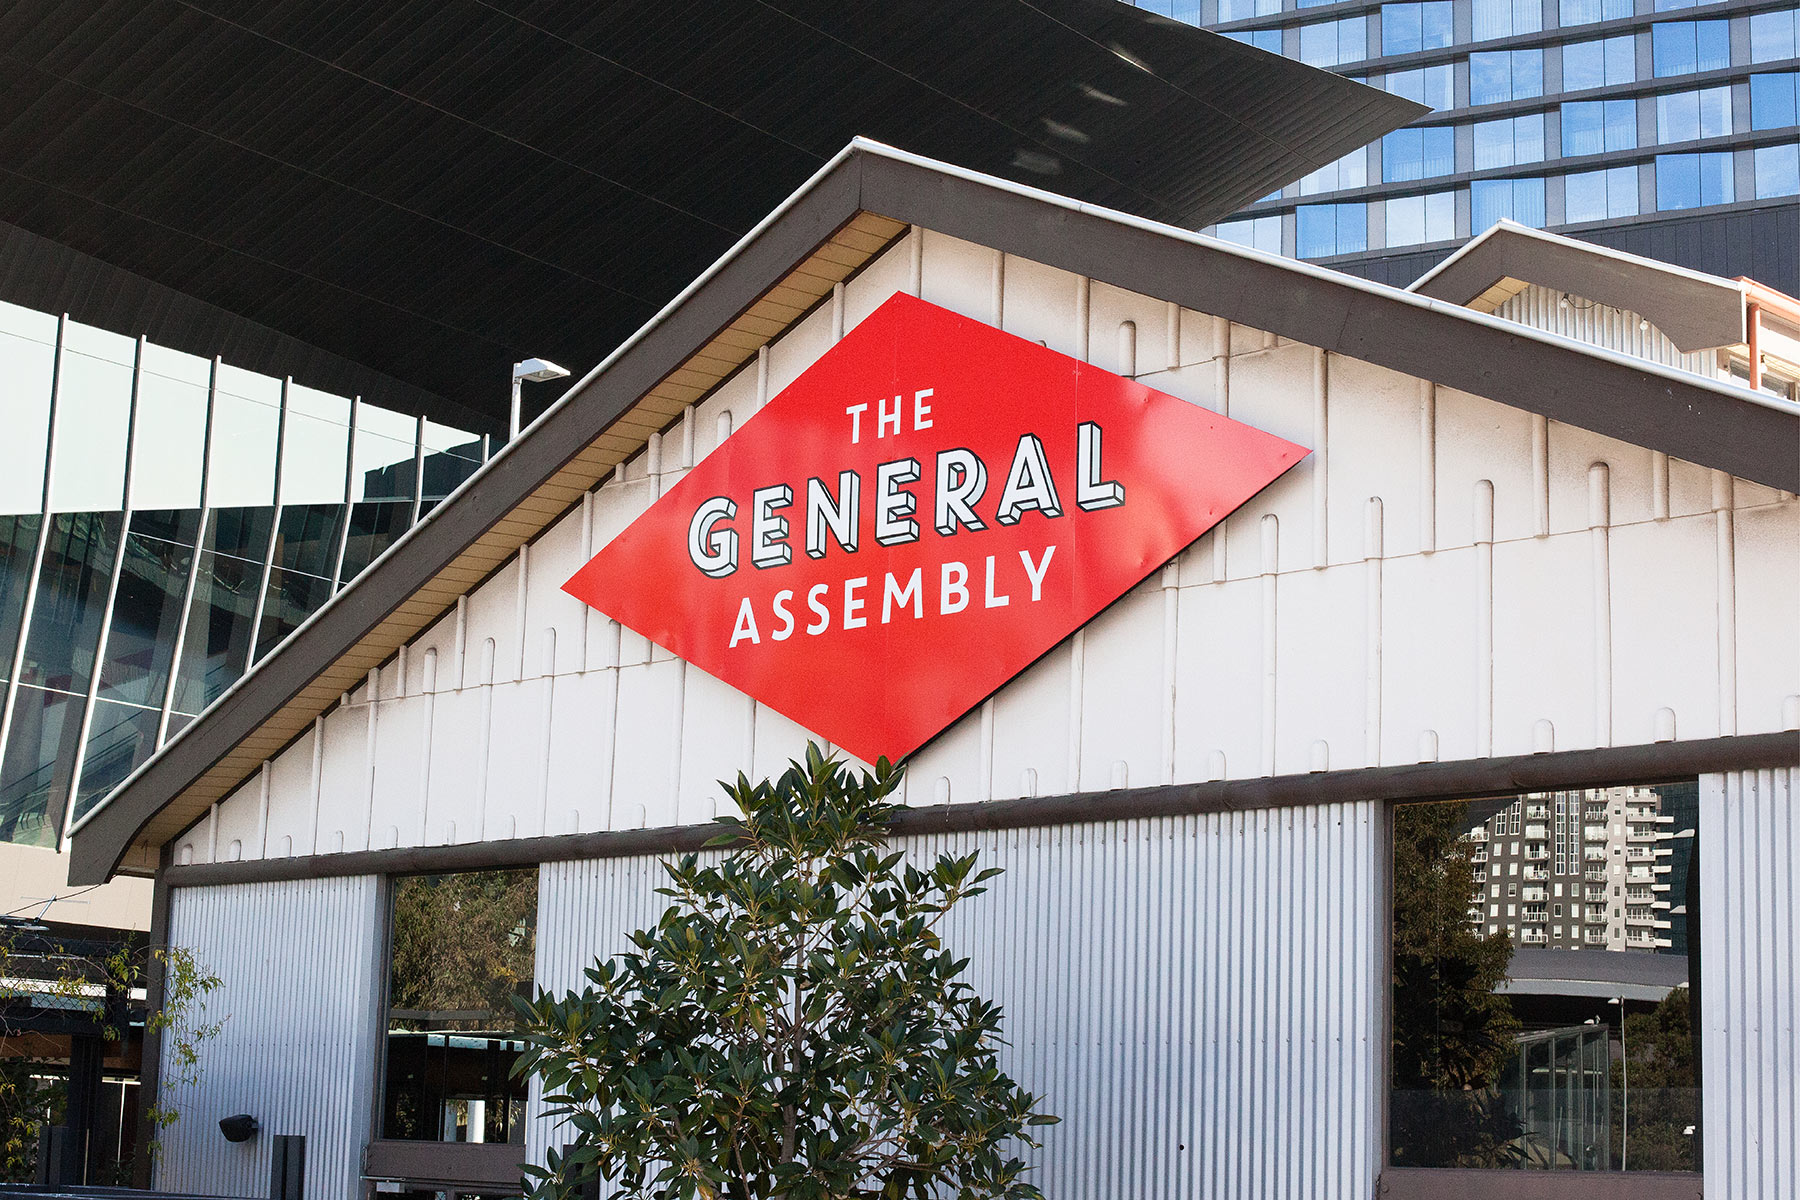 The General Assembly - signage